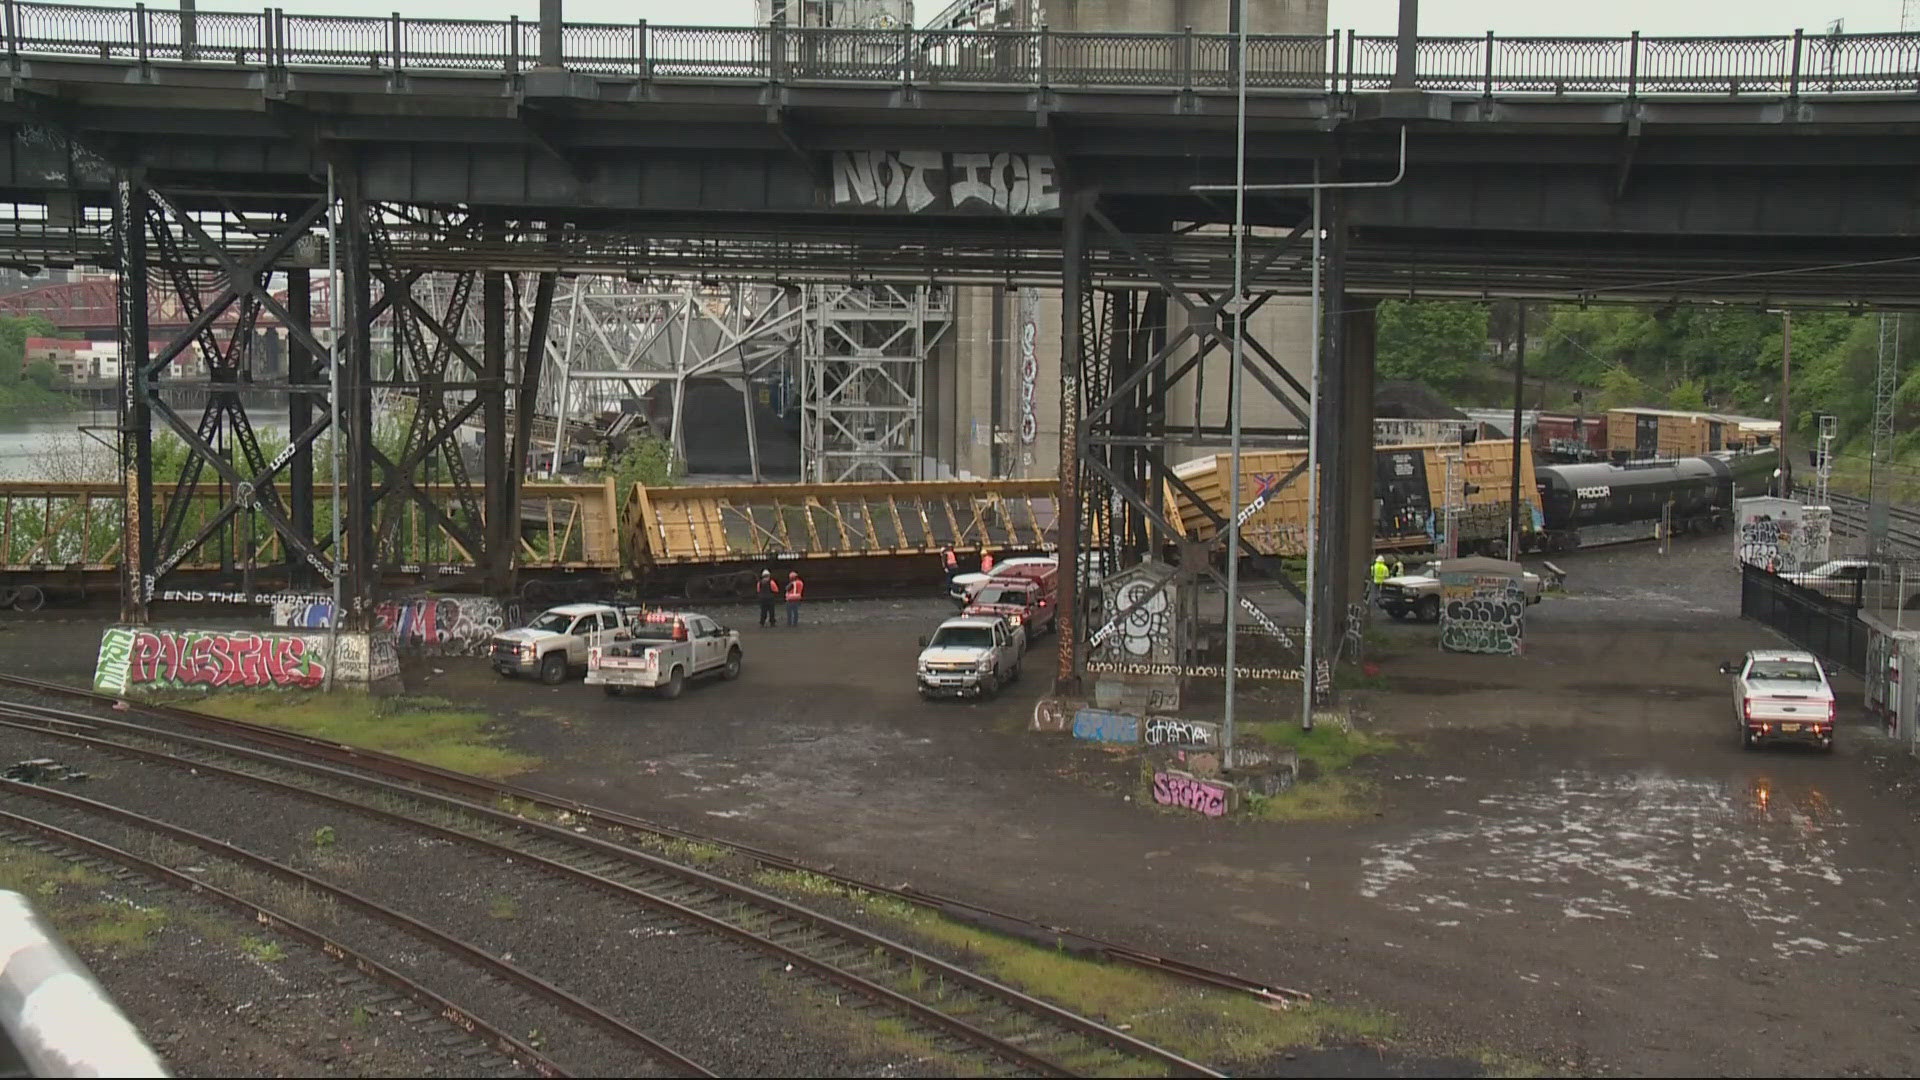 The Steel Bridge reopened just before 11 a.m. after a Union Pacific freight train derailed Monday morning.